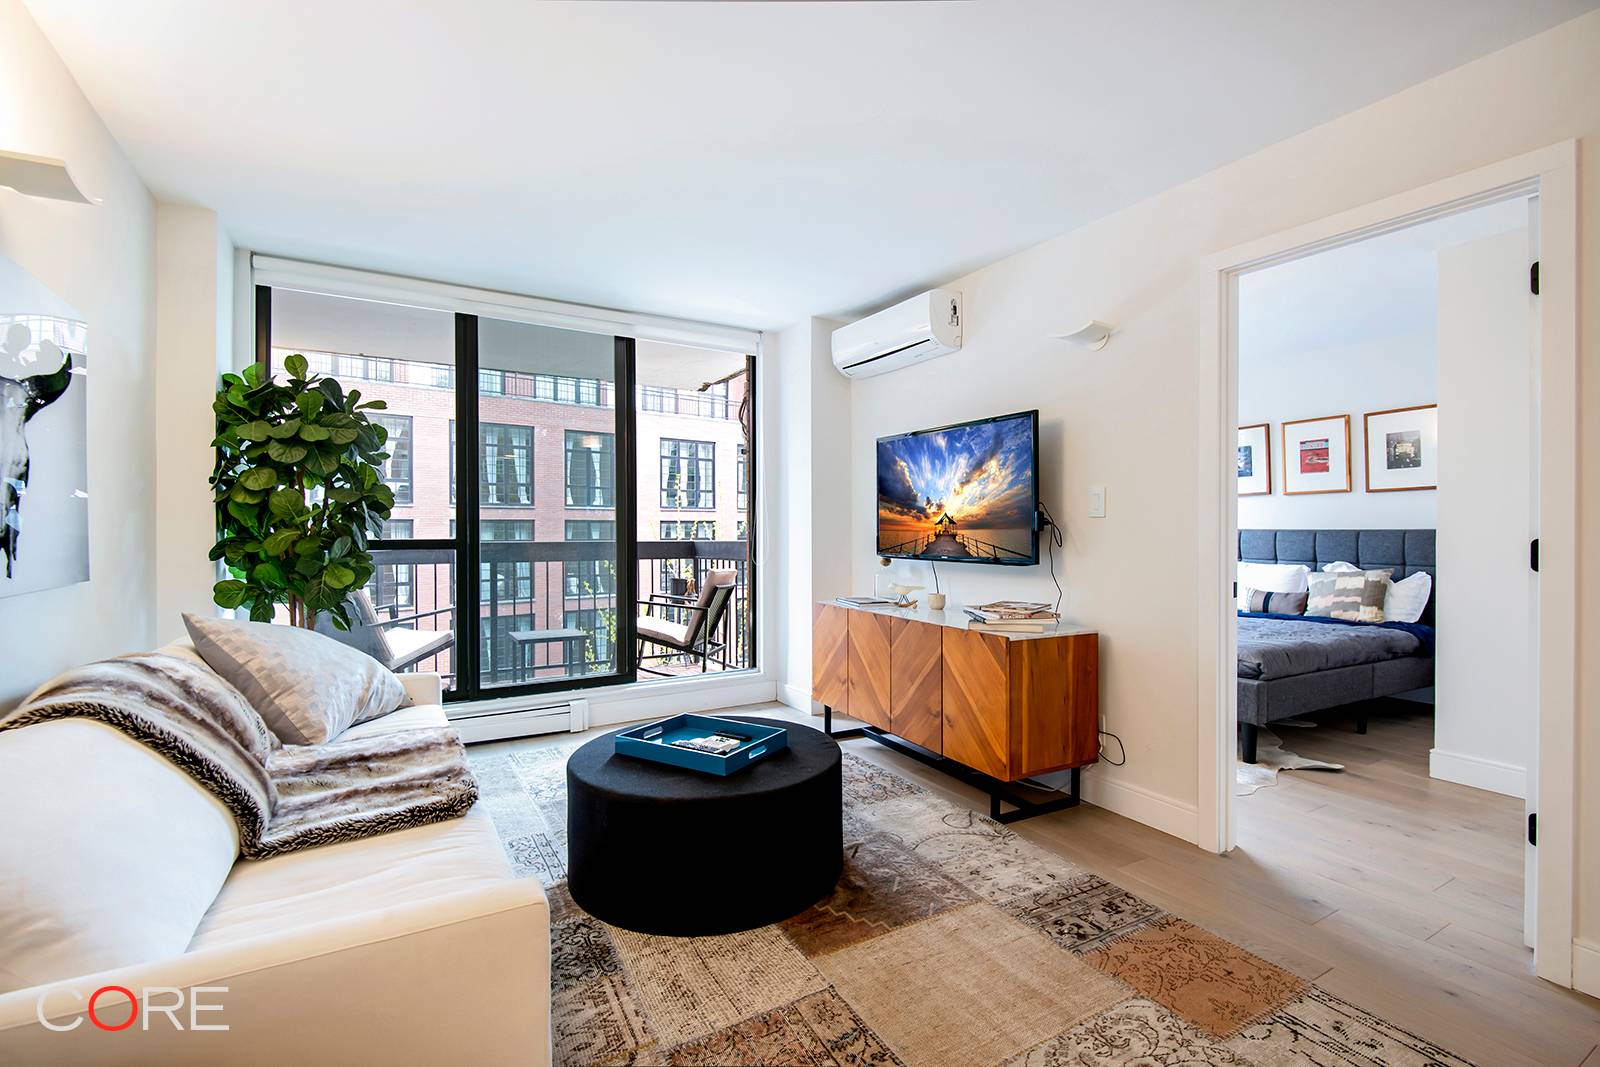 This gut renovated two bedroom, two bathroom home comes modernly furnished or unfurnished with a private balcony in one of the city's most trendy neighborhoods.